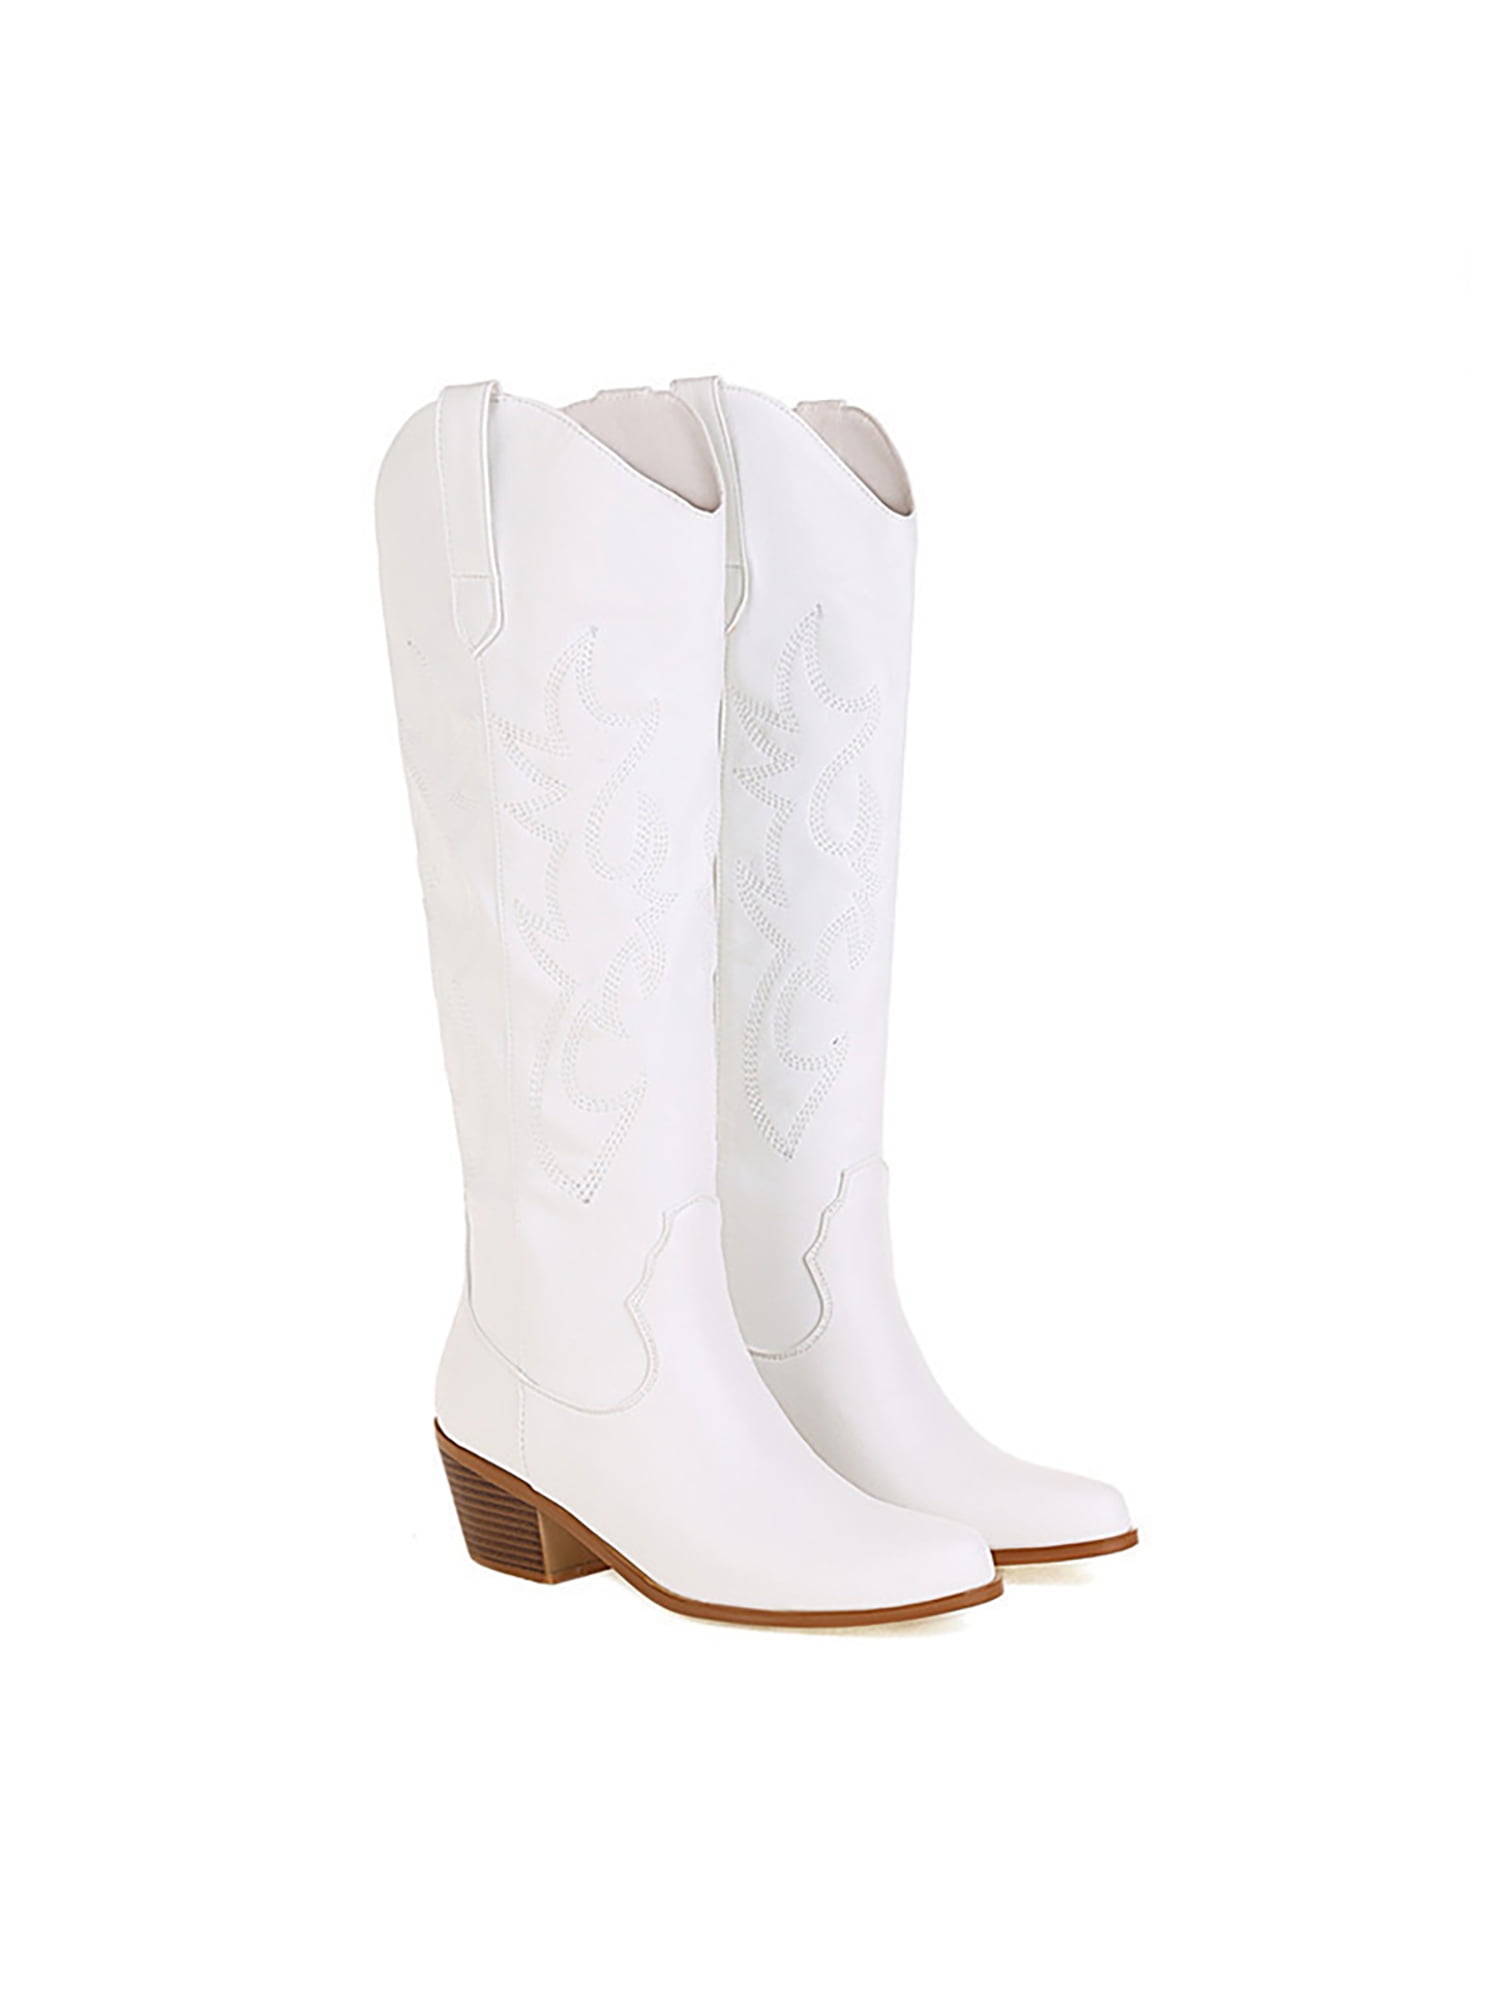 Daeful Cowgirl Boots for Women Embroidered Knee High Cowboy Boots ...